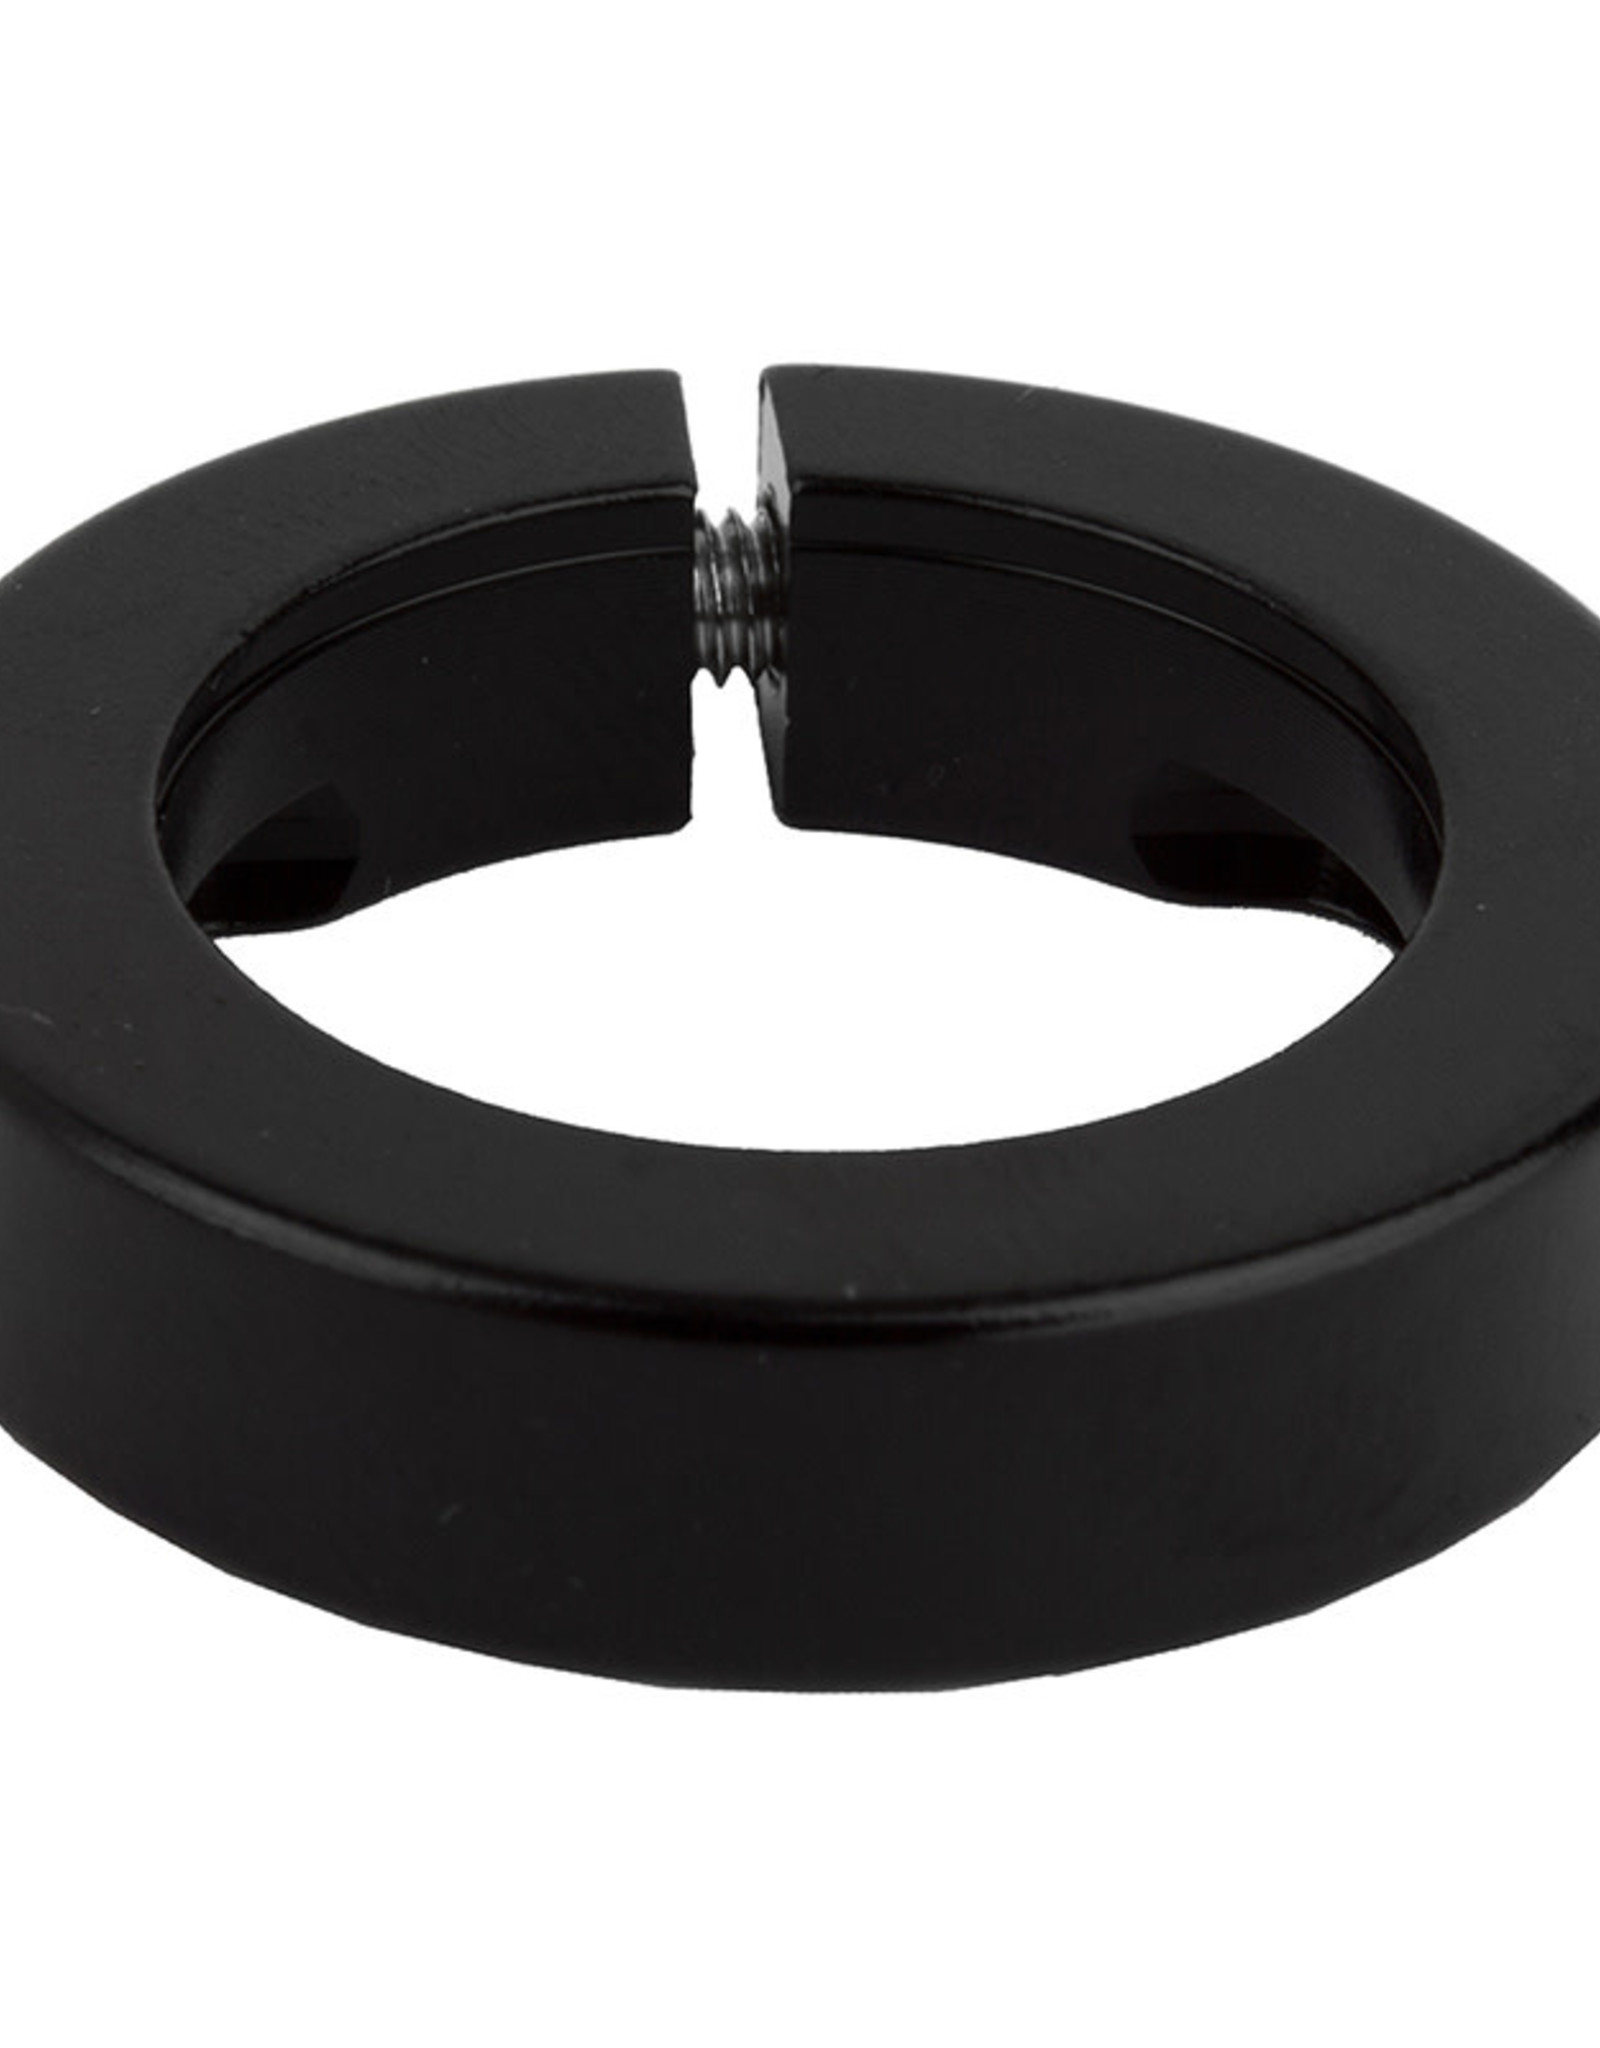 ODI ODI LOCK-JAW CLAMPS WITH SNAP CAPS BLACK SET OF 4